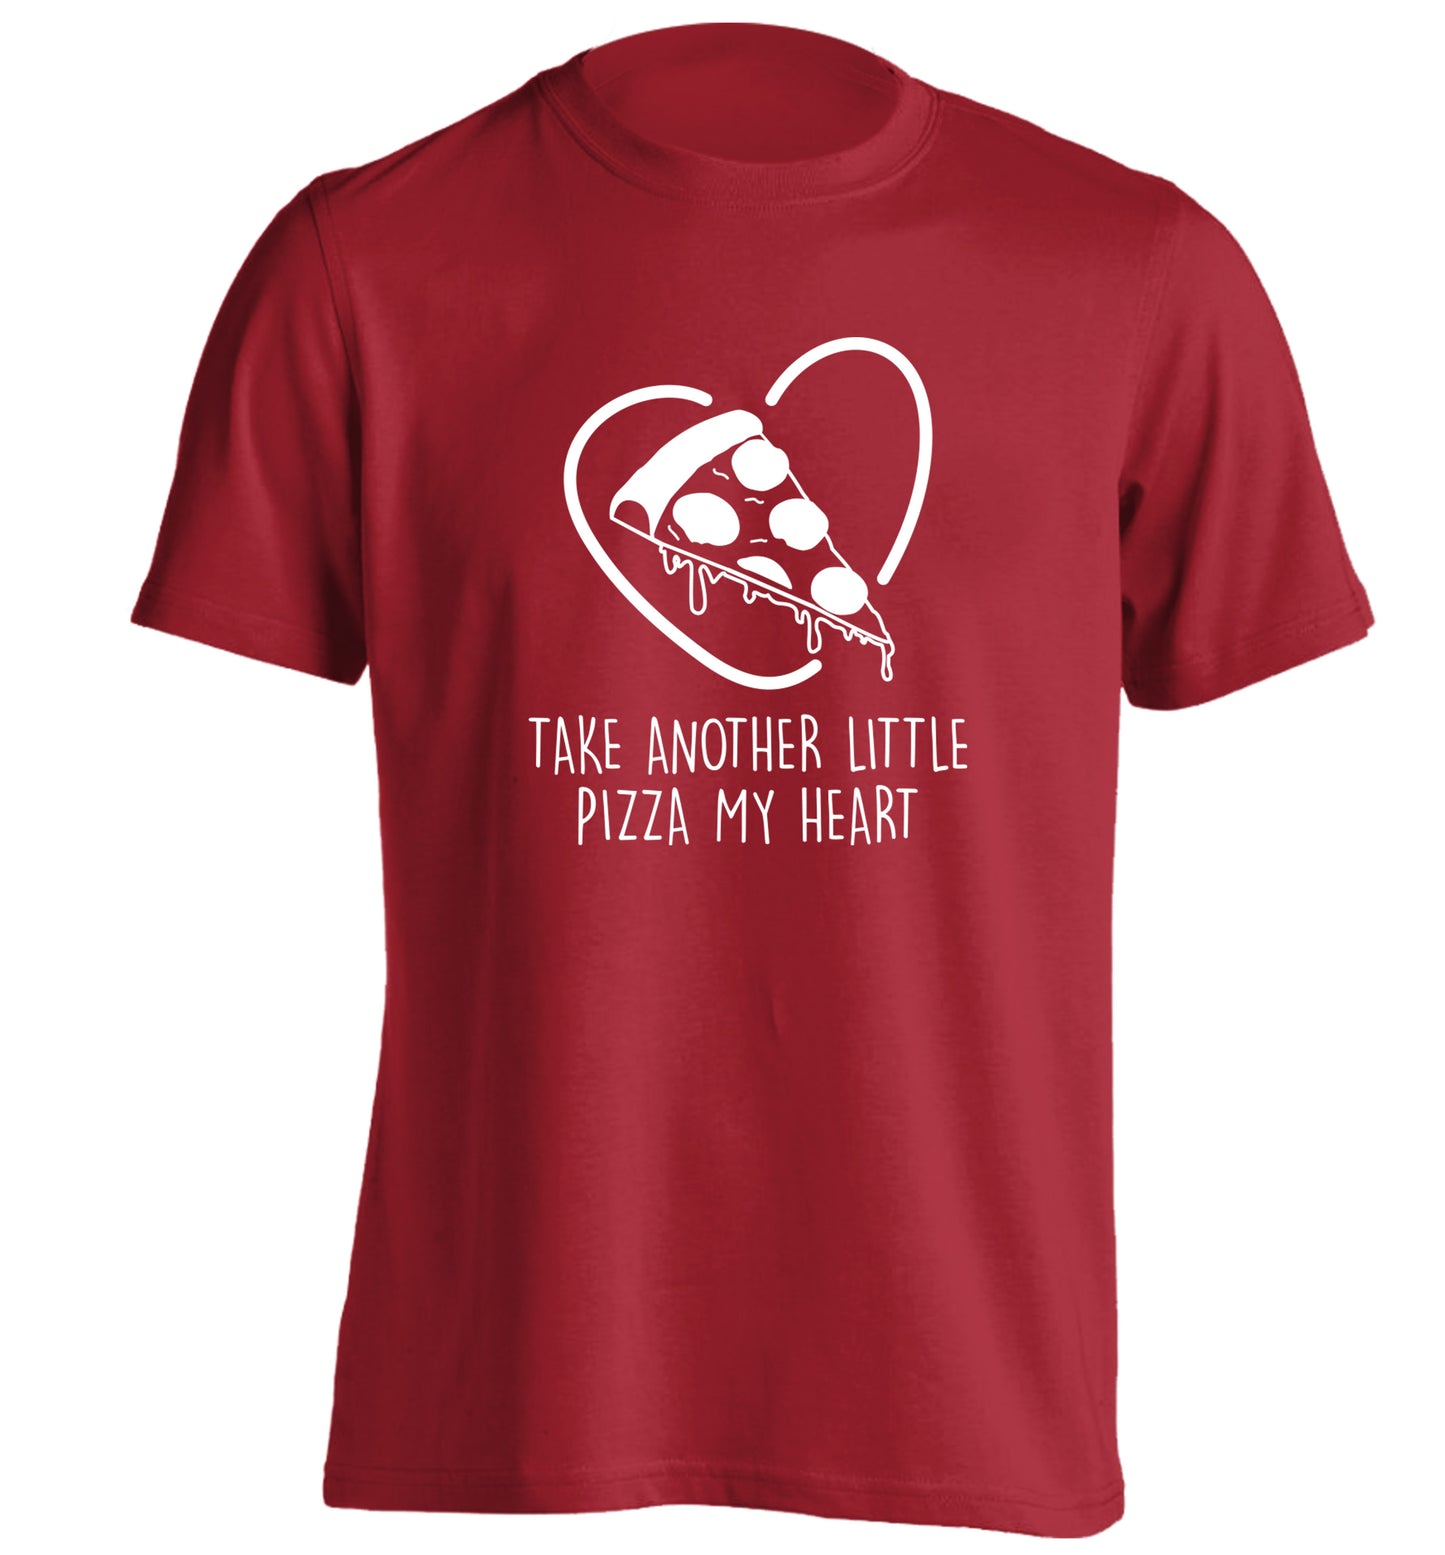 Take another little pizza my heart adults unisex red Tshirt 2XL